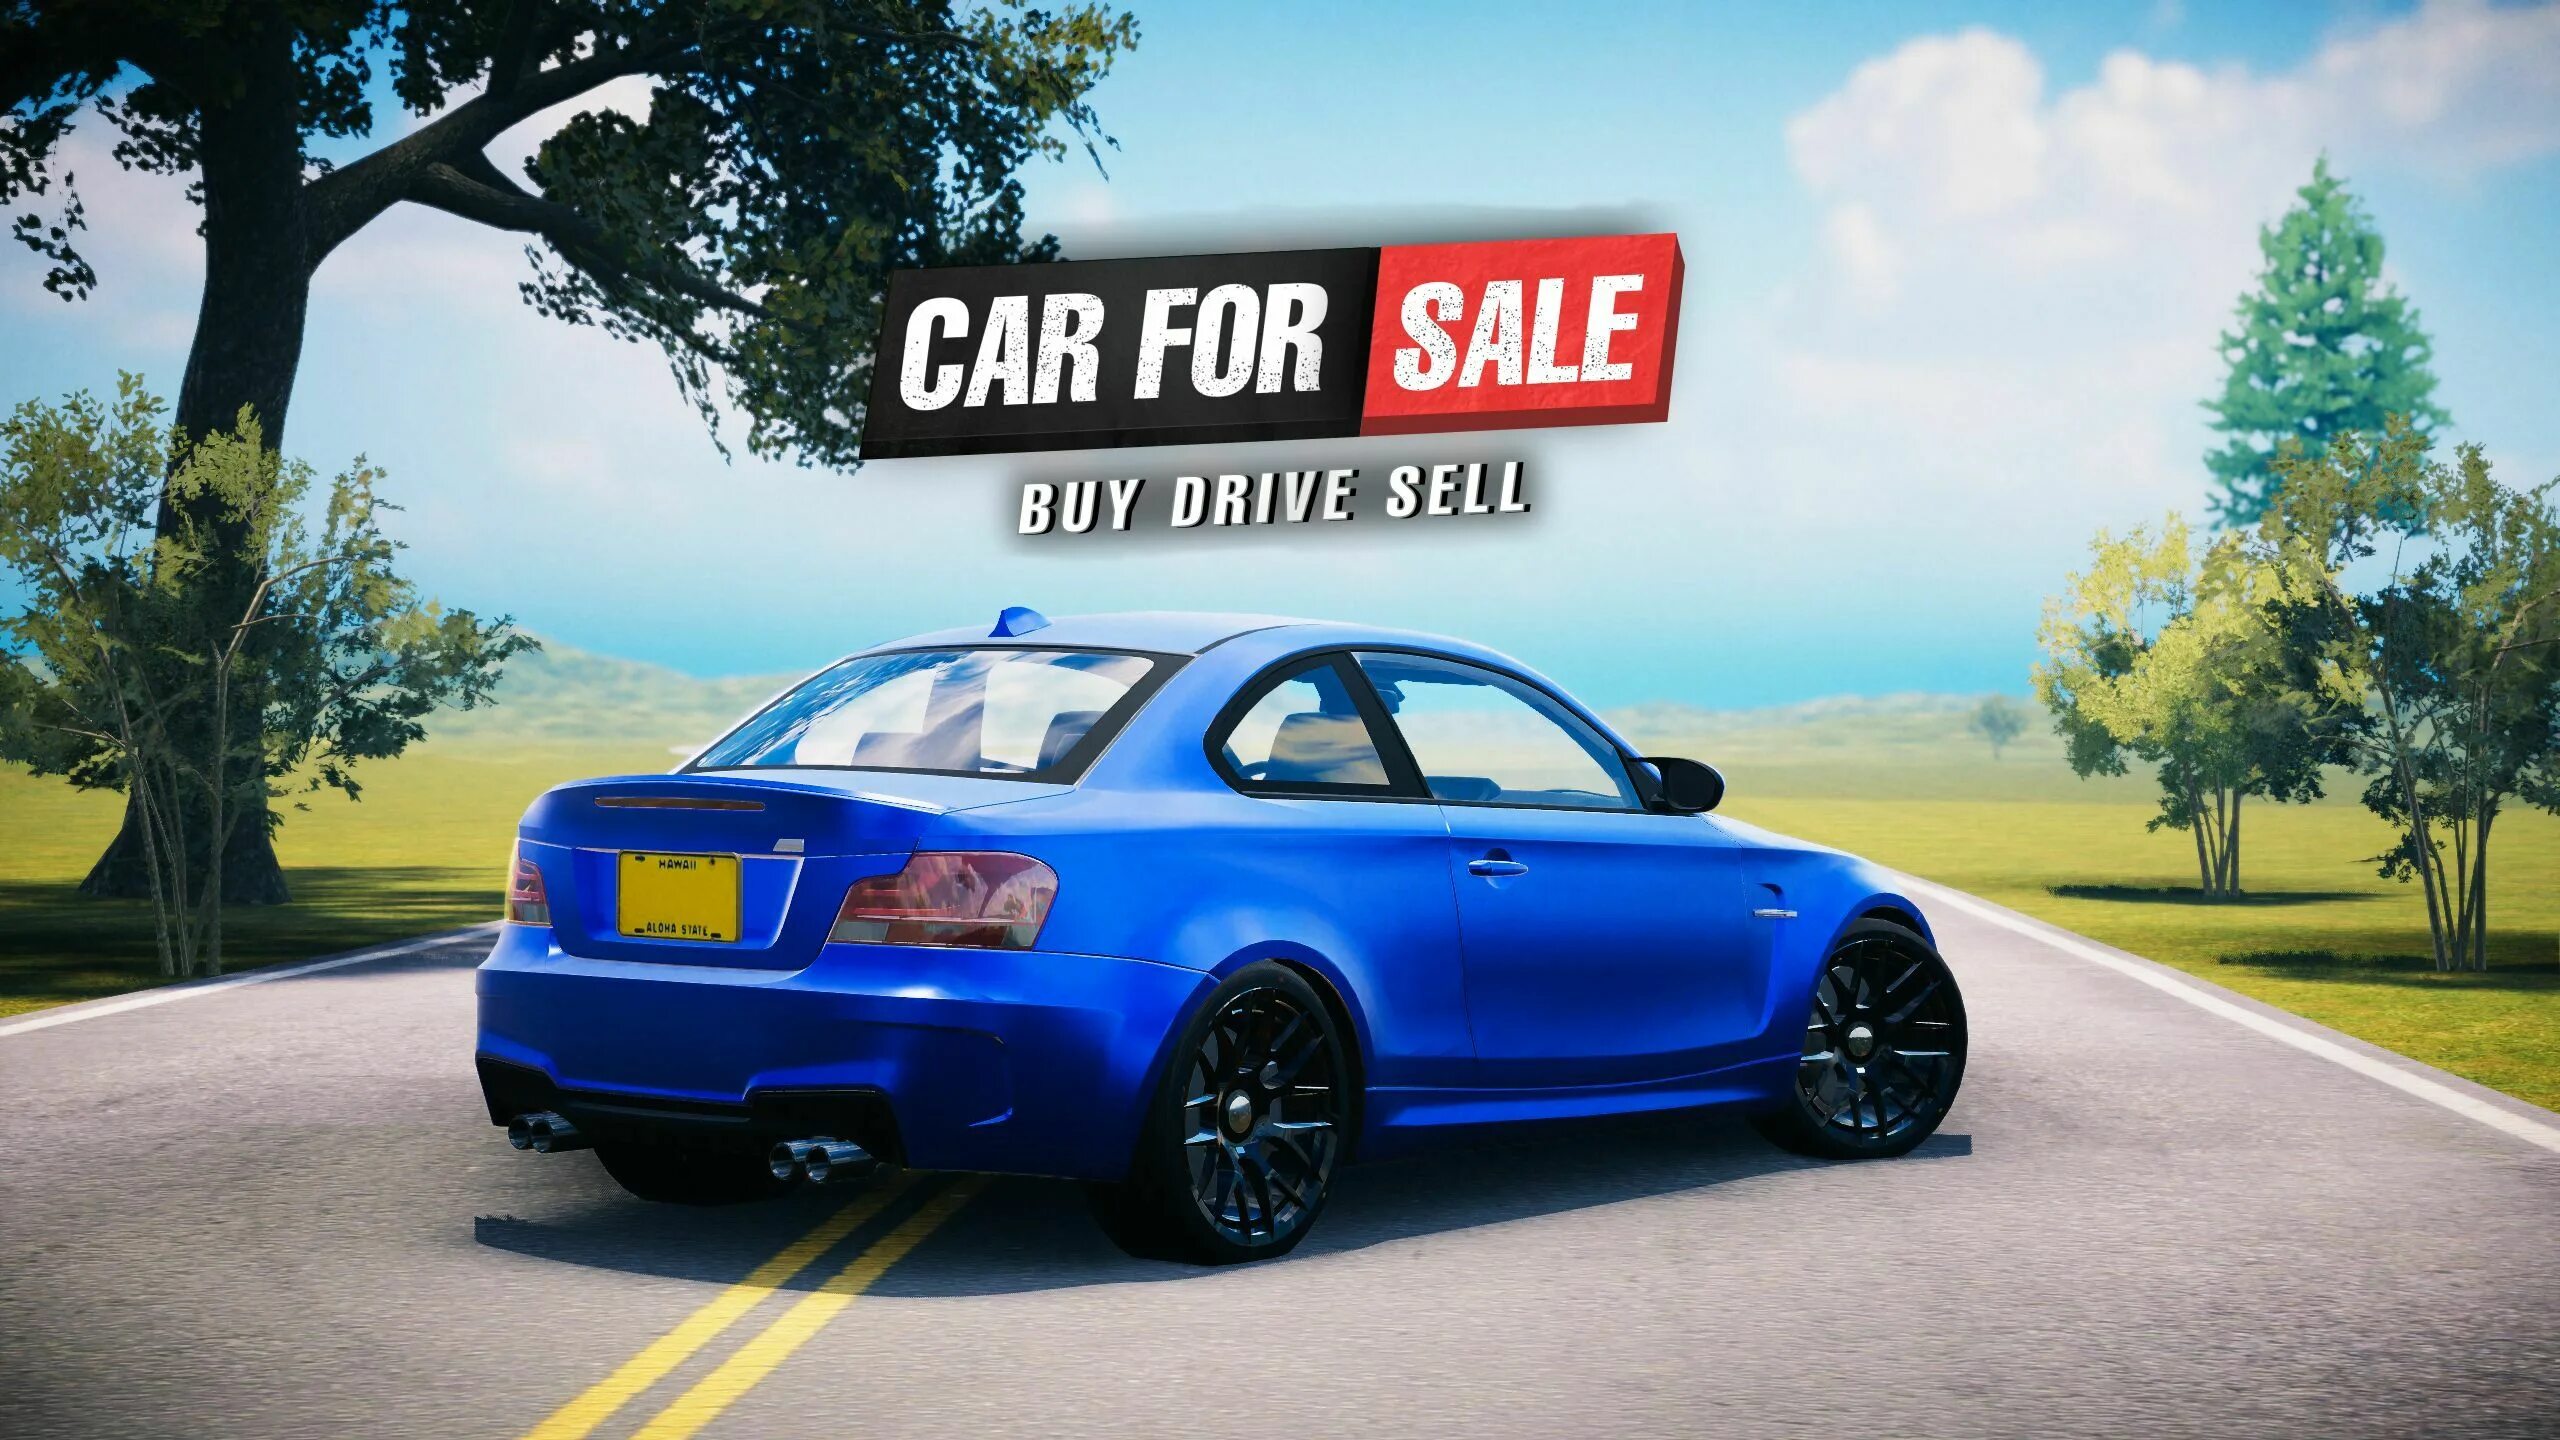 Car for sell simulator. Car for sale игра. Кар фор Сале симулятор. Car Fo sale Simulator. Кар фор Сейл симулятор 2023.